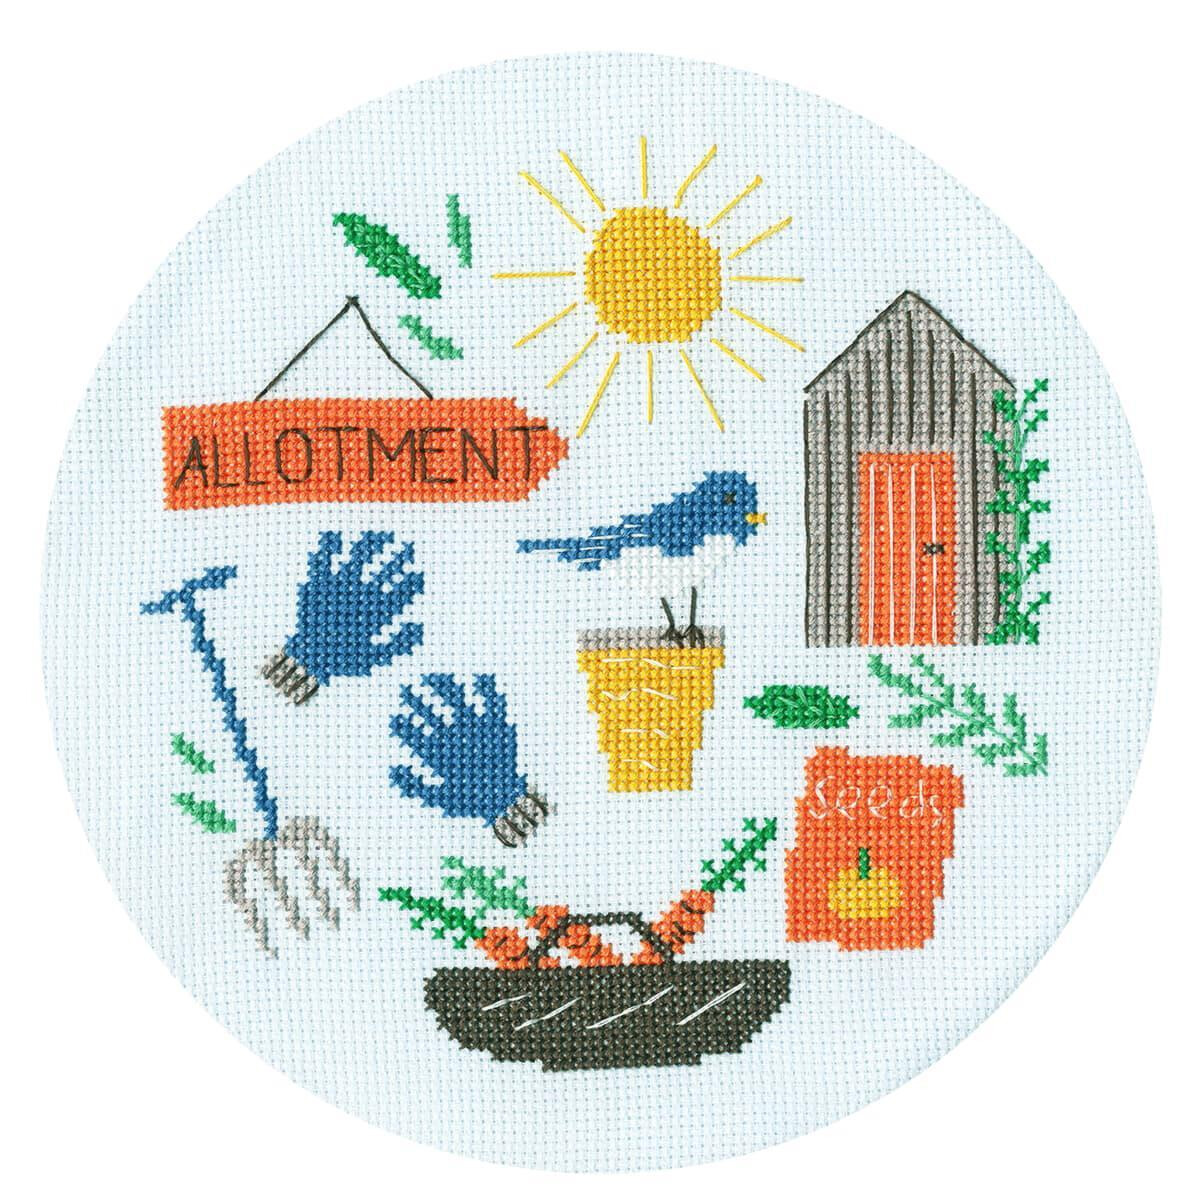 A circular cross stitch design created from a Bothy...